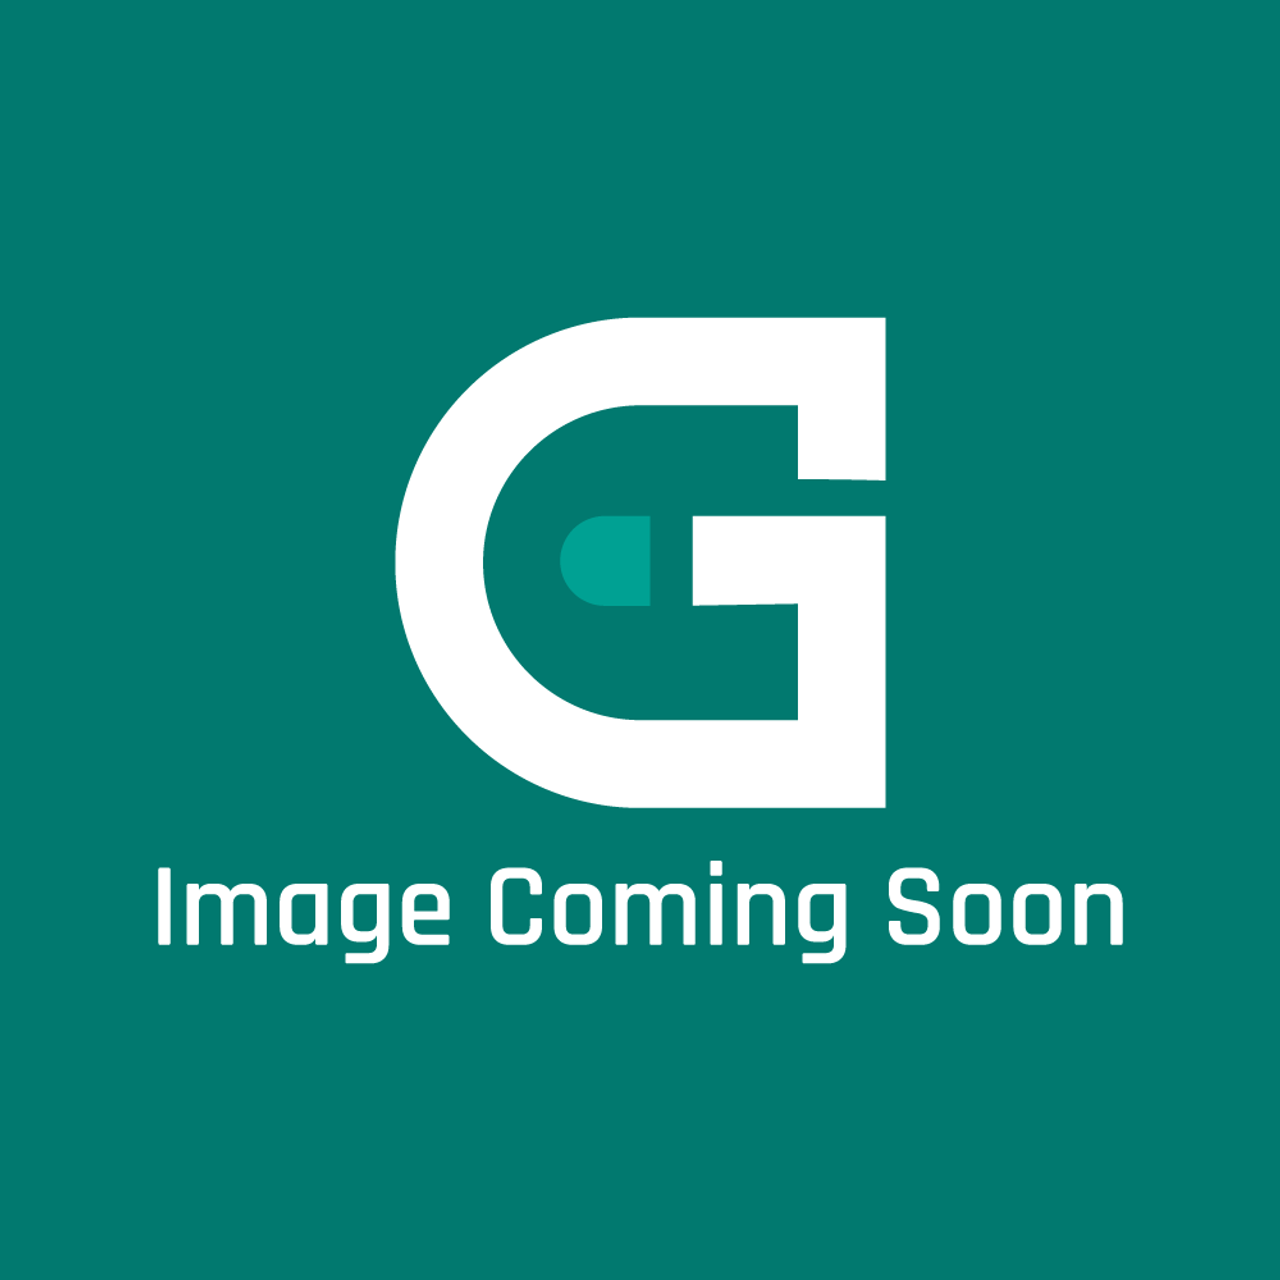 GE Appliances WX10X1410 - 1LB R410A - Image Coming Soon!